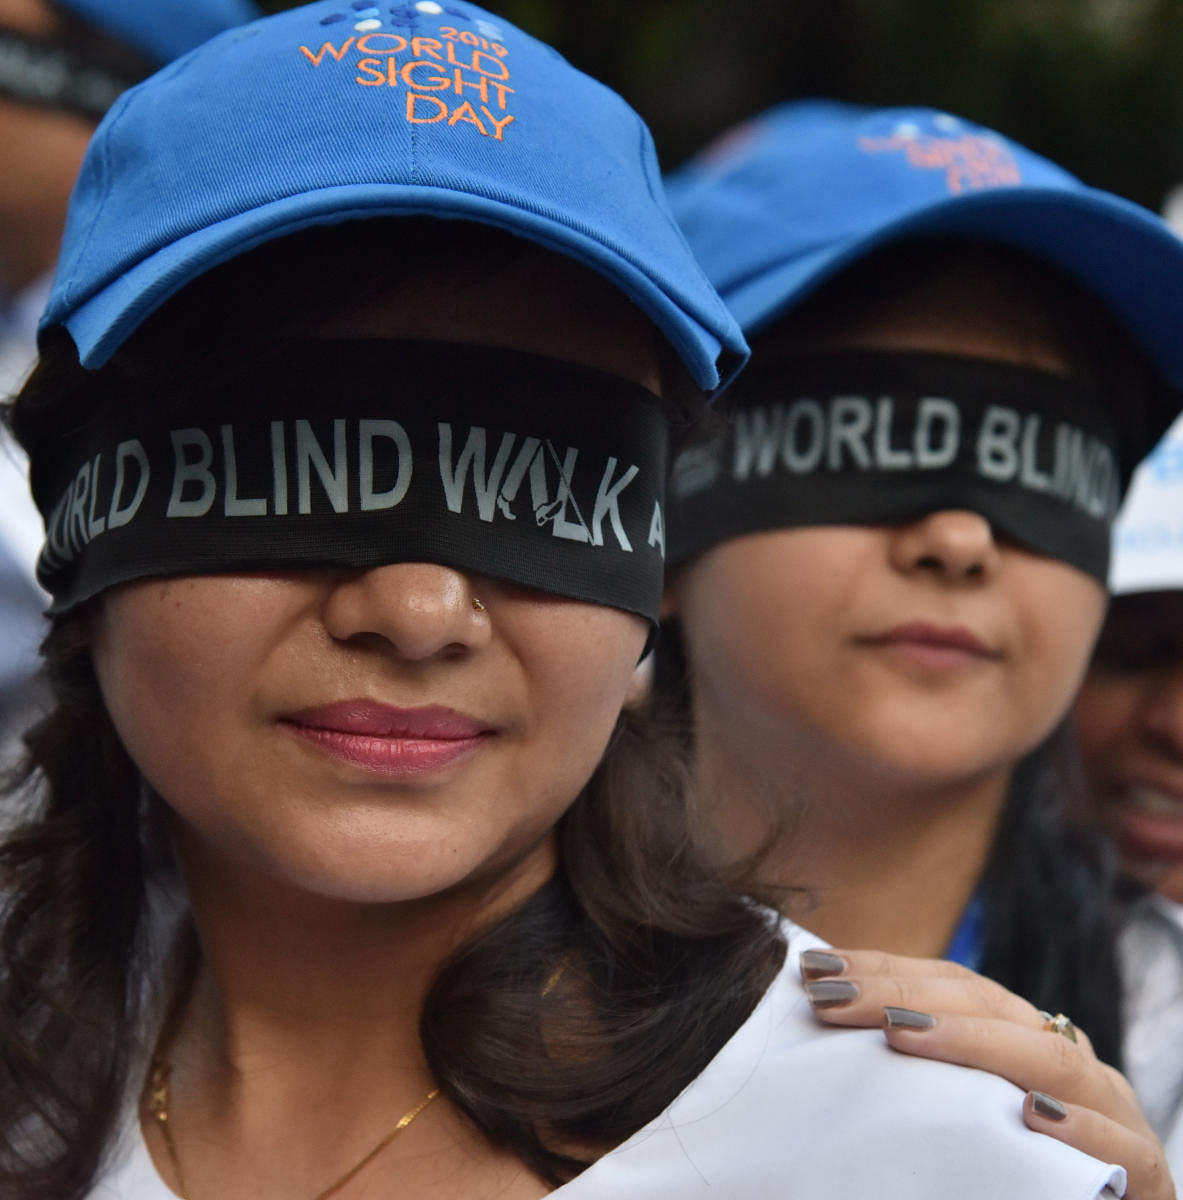 Participants at the World Blind Walk from St Joseph School to Brigade road (Samson) circle organised by Y’ S Men International in Bengaluru on Thursday, 10 October, 2019. Photo by Janardhan B K